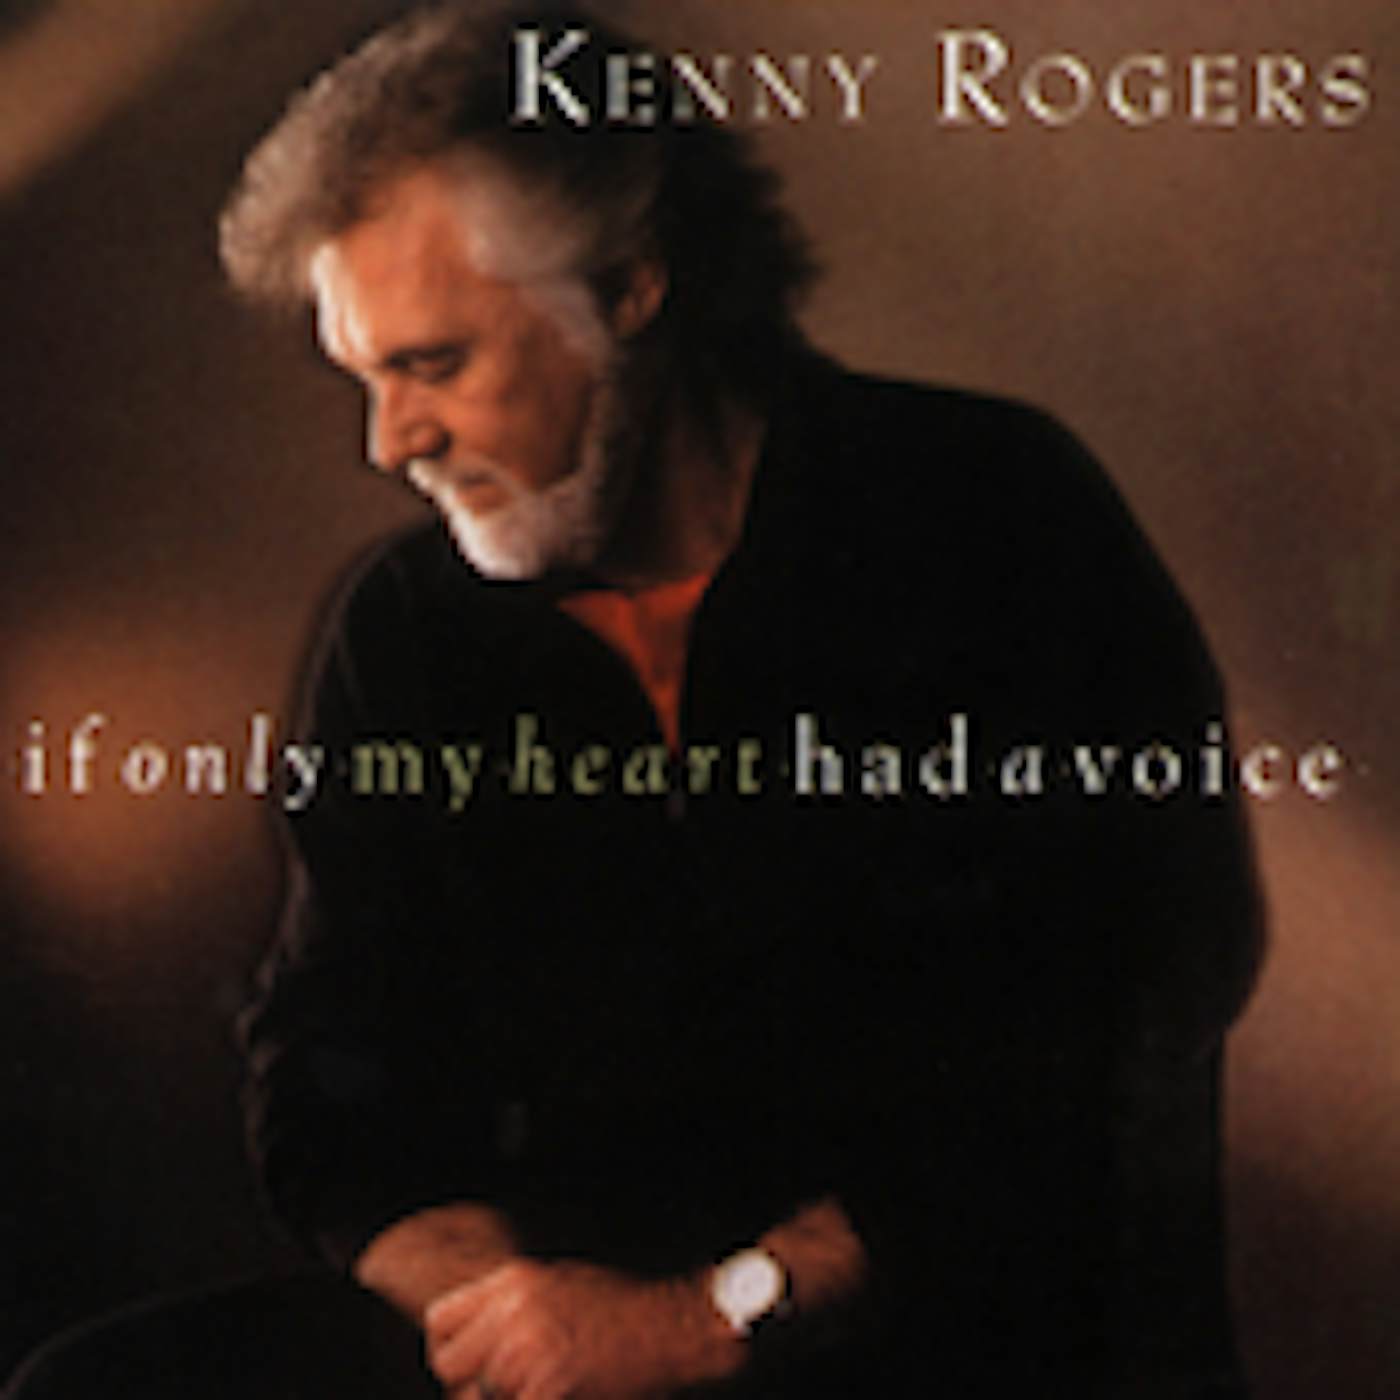 Kenny Rogers IF MY HEART HAD A VOICE CD